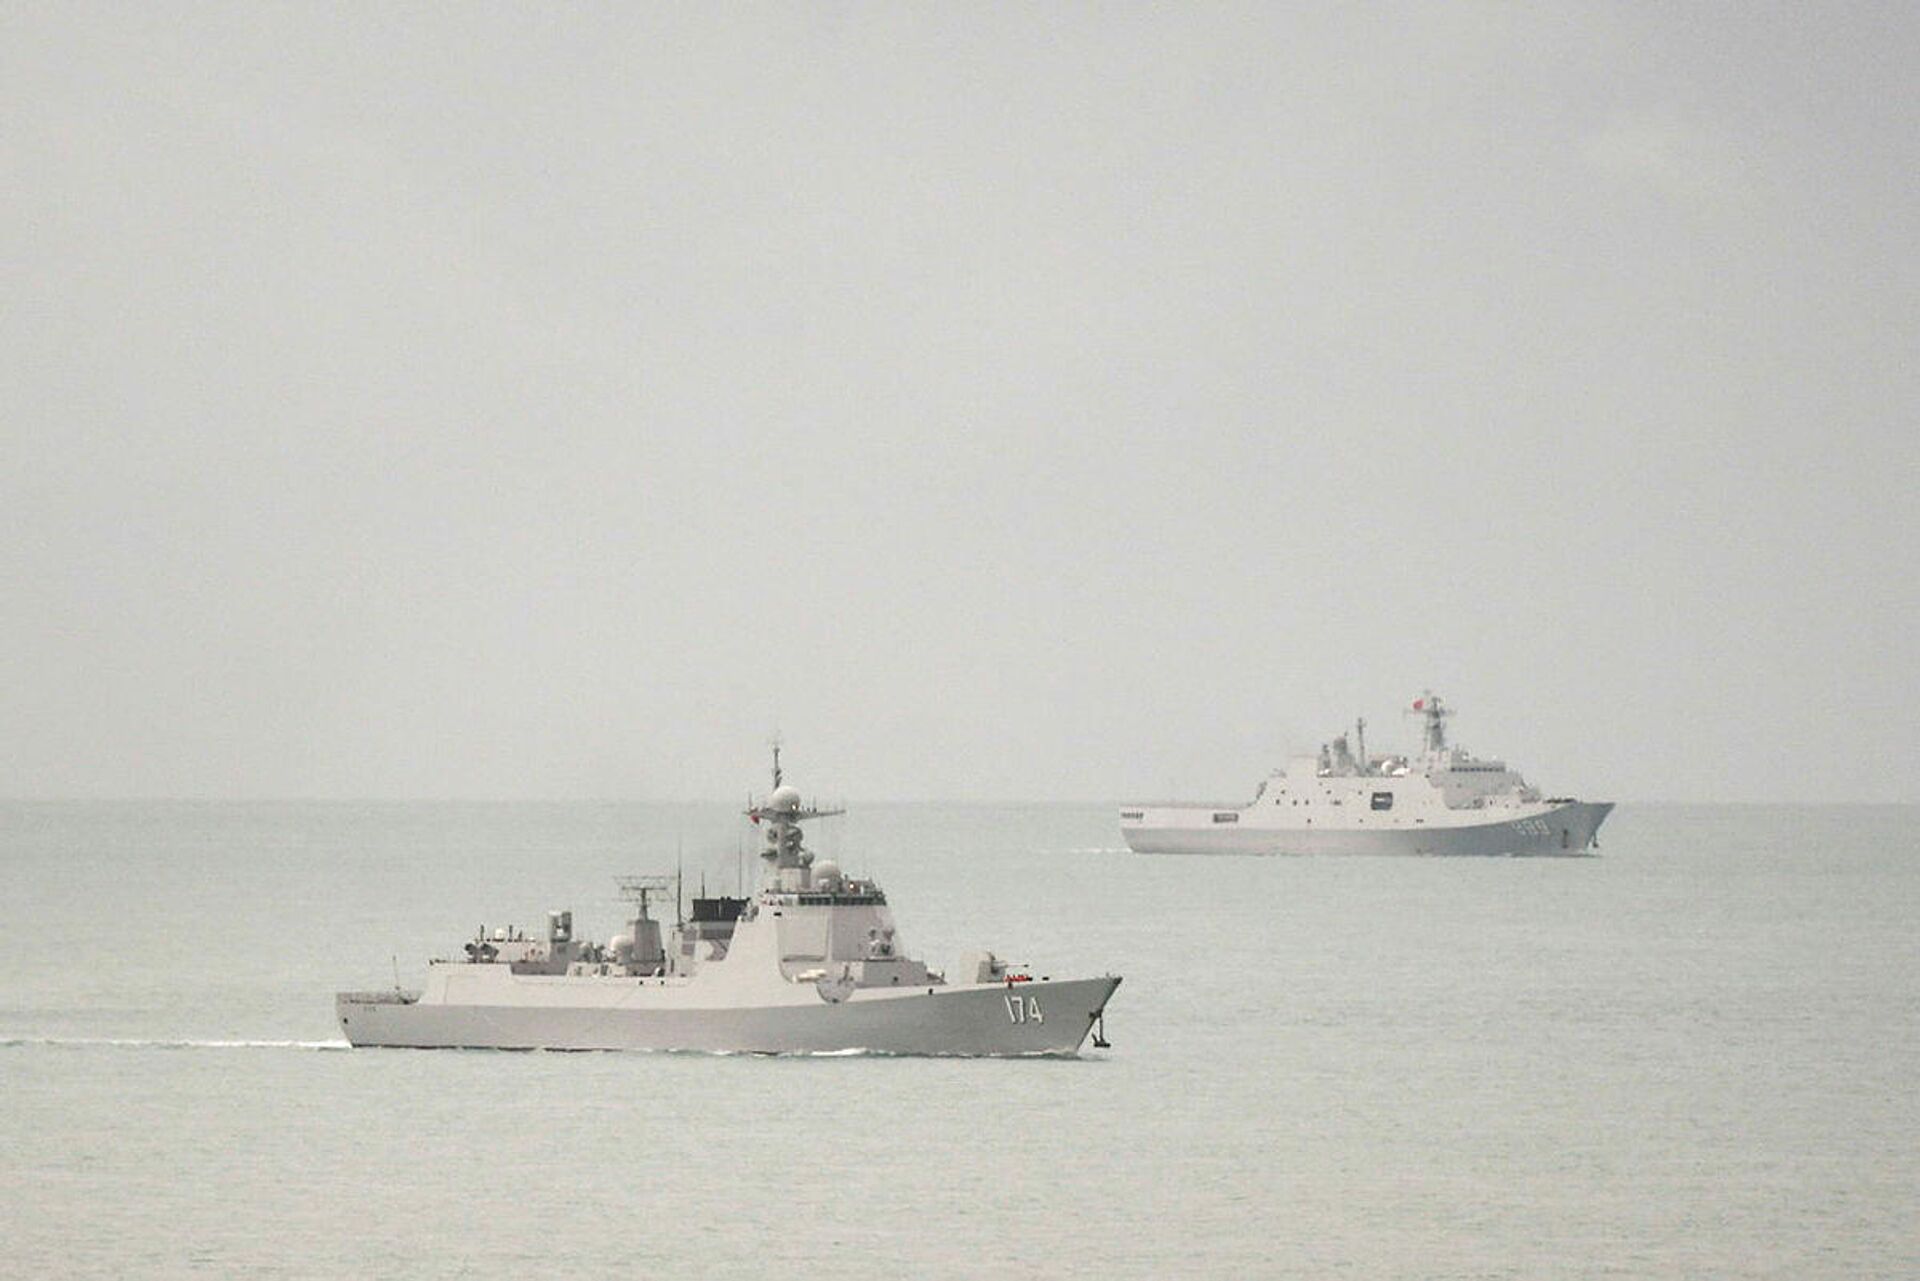 A PLA-N Luyang-class guided missile destroyer (left) and a PLA-N Yuzhao-class amphibious transport dock vessel leave the Torres Strait and enter the Coral Sea on 18 February 2022. - Sputnik International, 1920, 19.02.2022